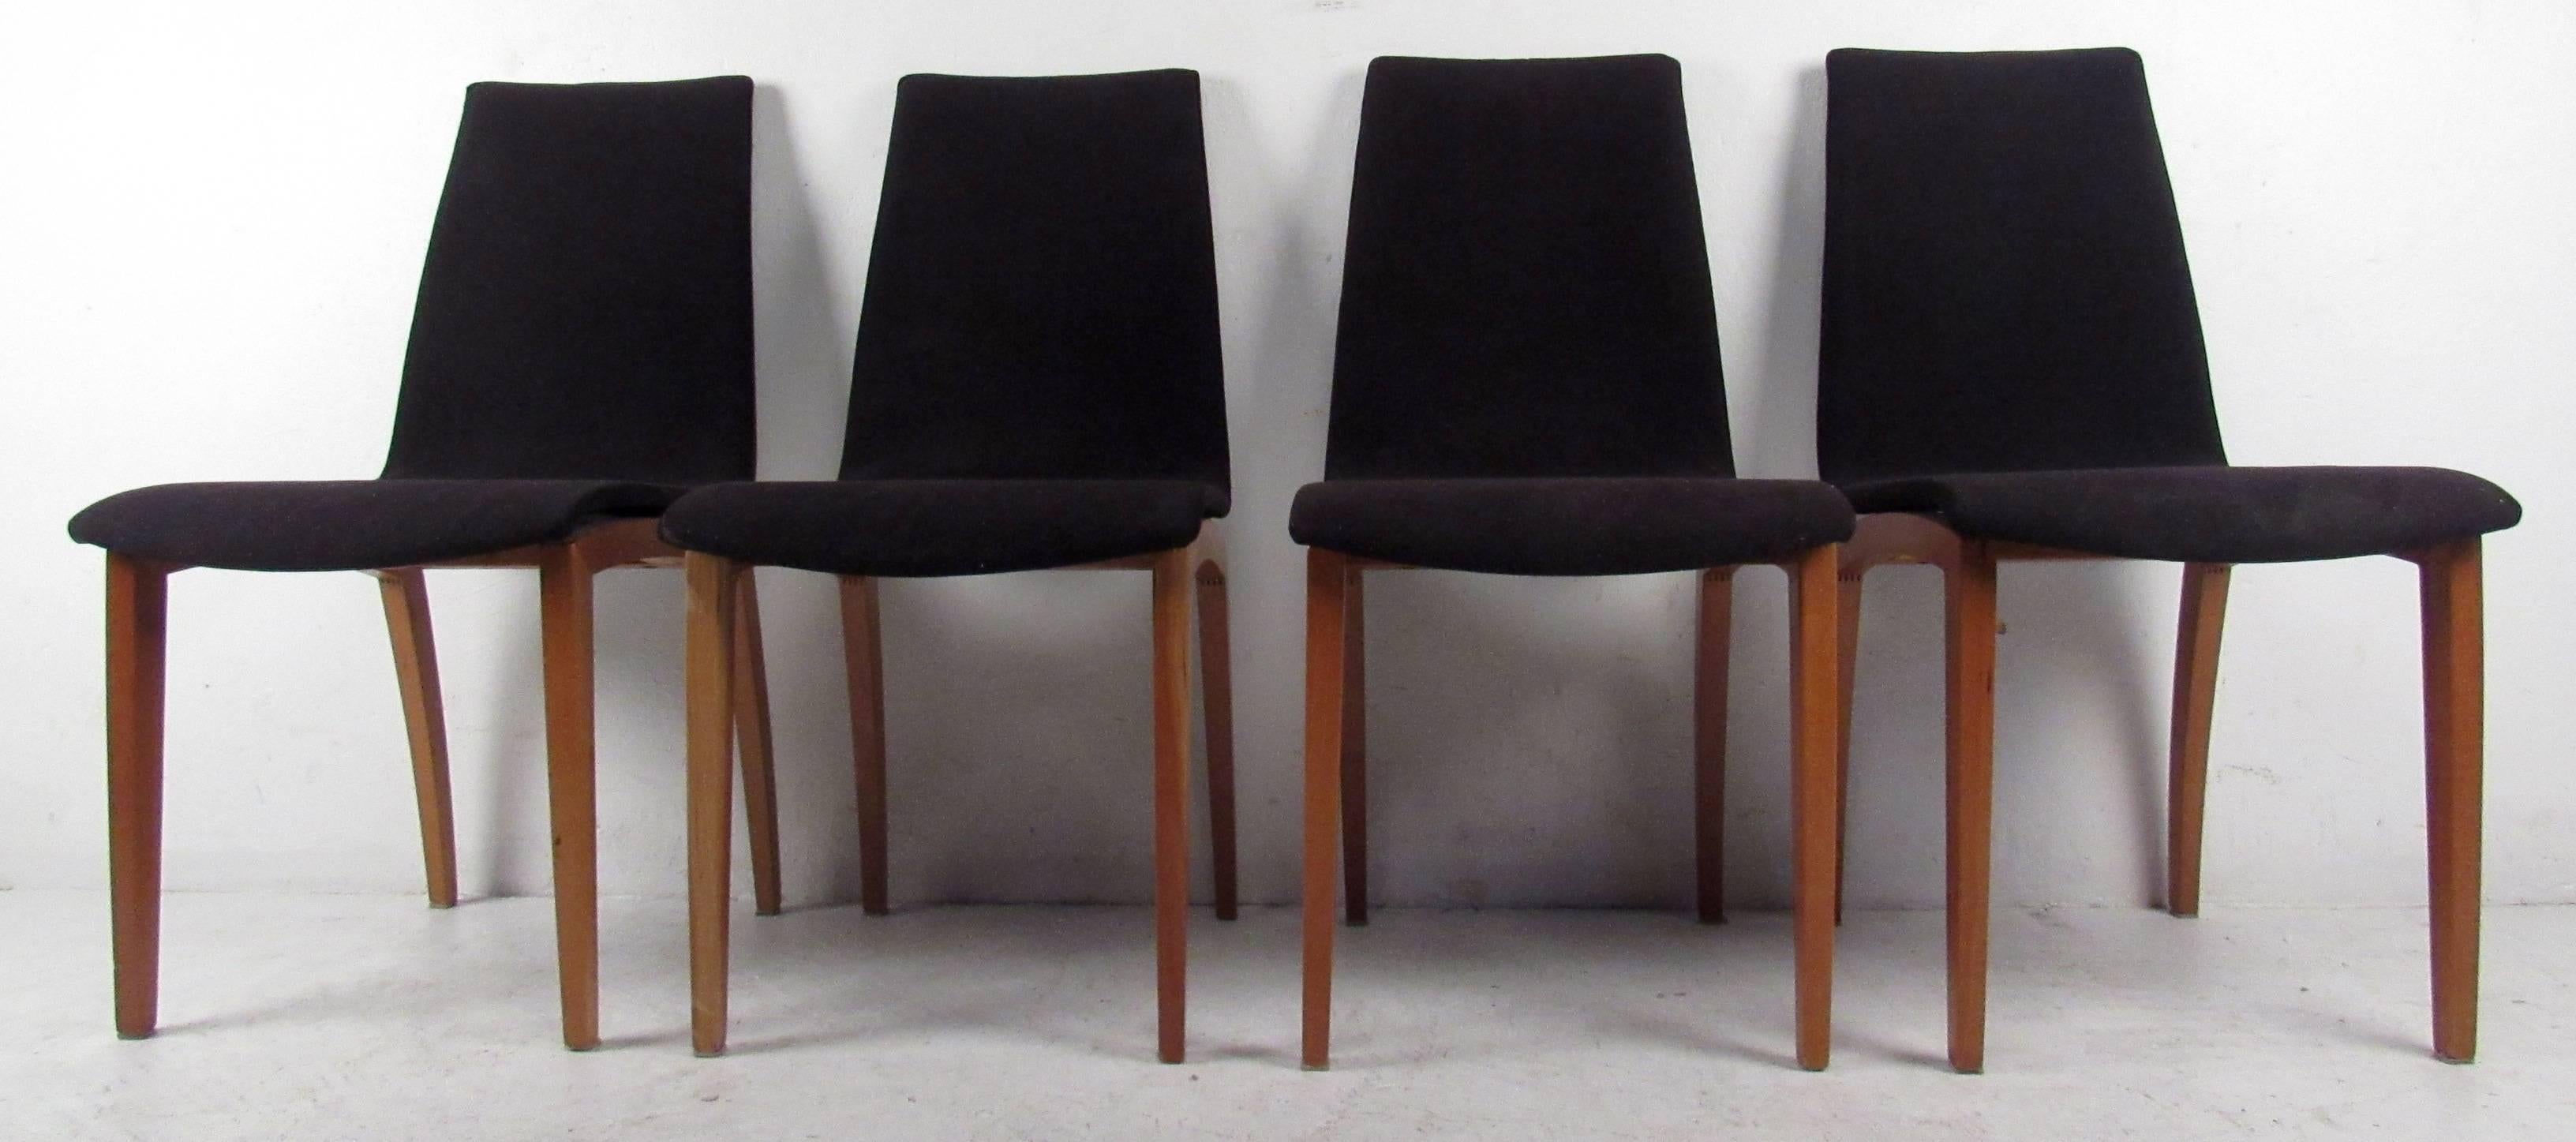 Set of vintage-modern Italian dining chairs featuring sculpted legs and upholstered seats and backs.

Please confirm item location NY or NJ with dealer.